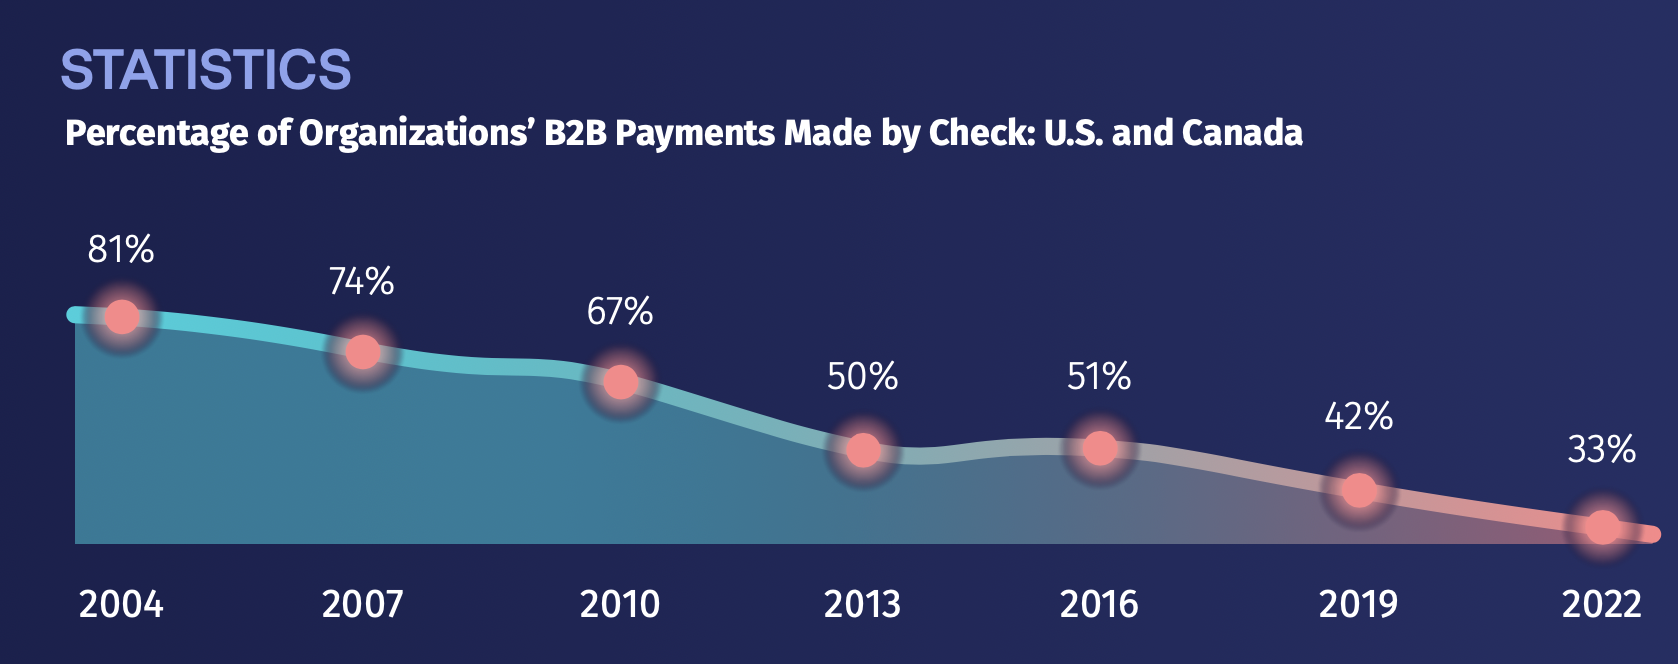 This image shows the percentage of companies that use checks for B2B payments, and how over time this number is decreasing. This is largely shown by a plotted graph trending downwards.